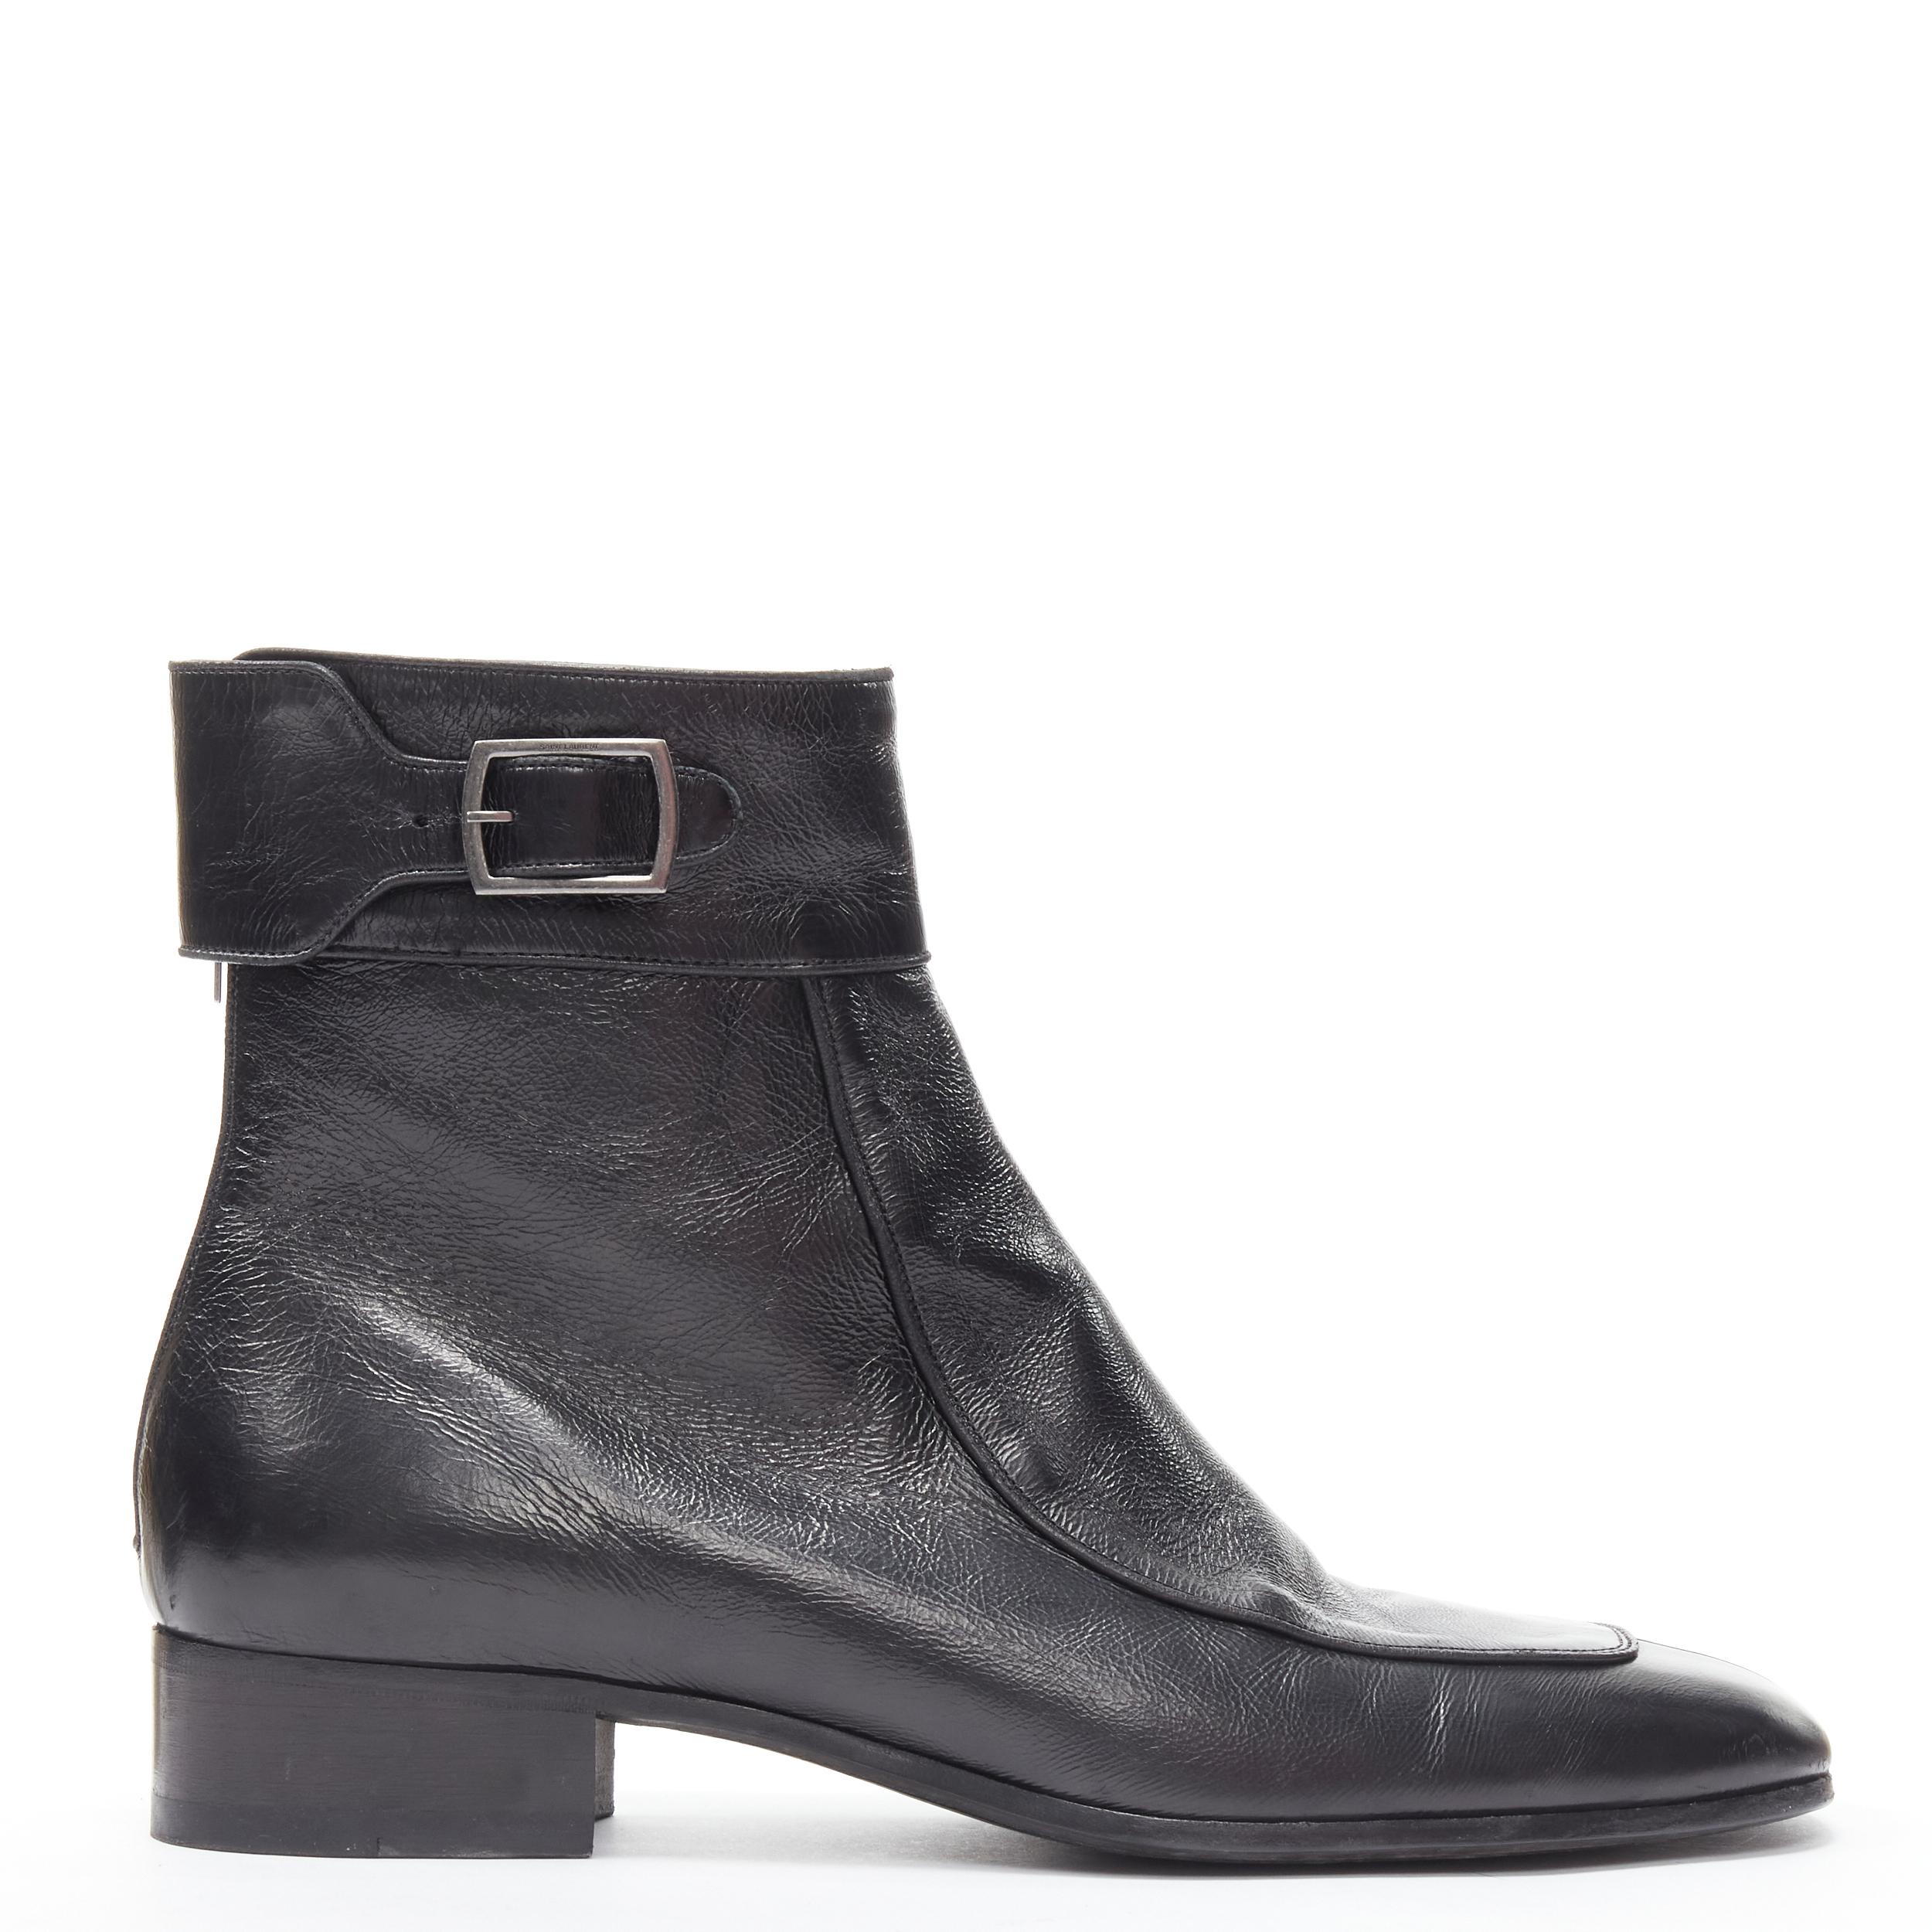 new SAINT LAURENT Miles 30 Age Bootie Baby Eighty black square toe boot EU42 
Reference: TGAS/B01751 
Brand: Saint Laurent 
Material: Leather 
Color: Black 
Pattern: Solid 
Closure: Zip 
Extra Detail: Intentionally designed to be aged and slightly